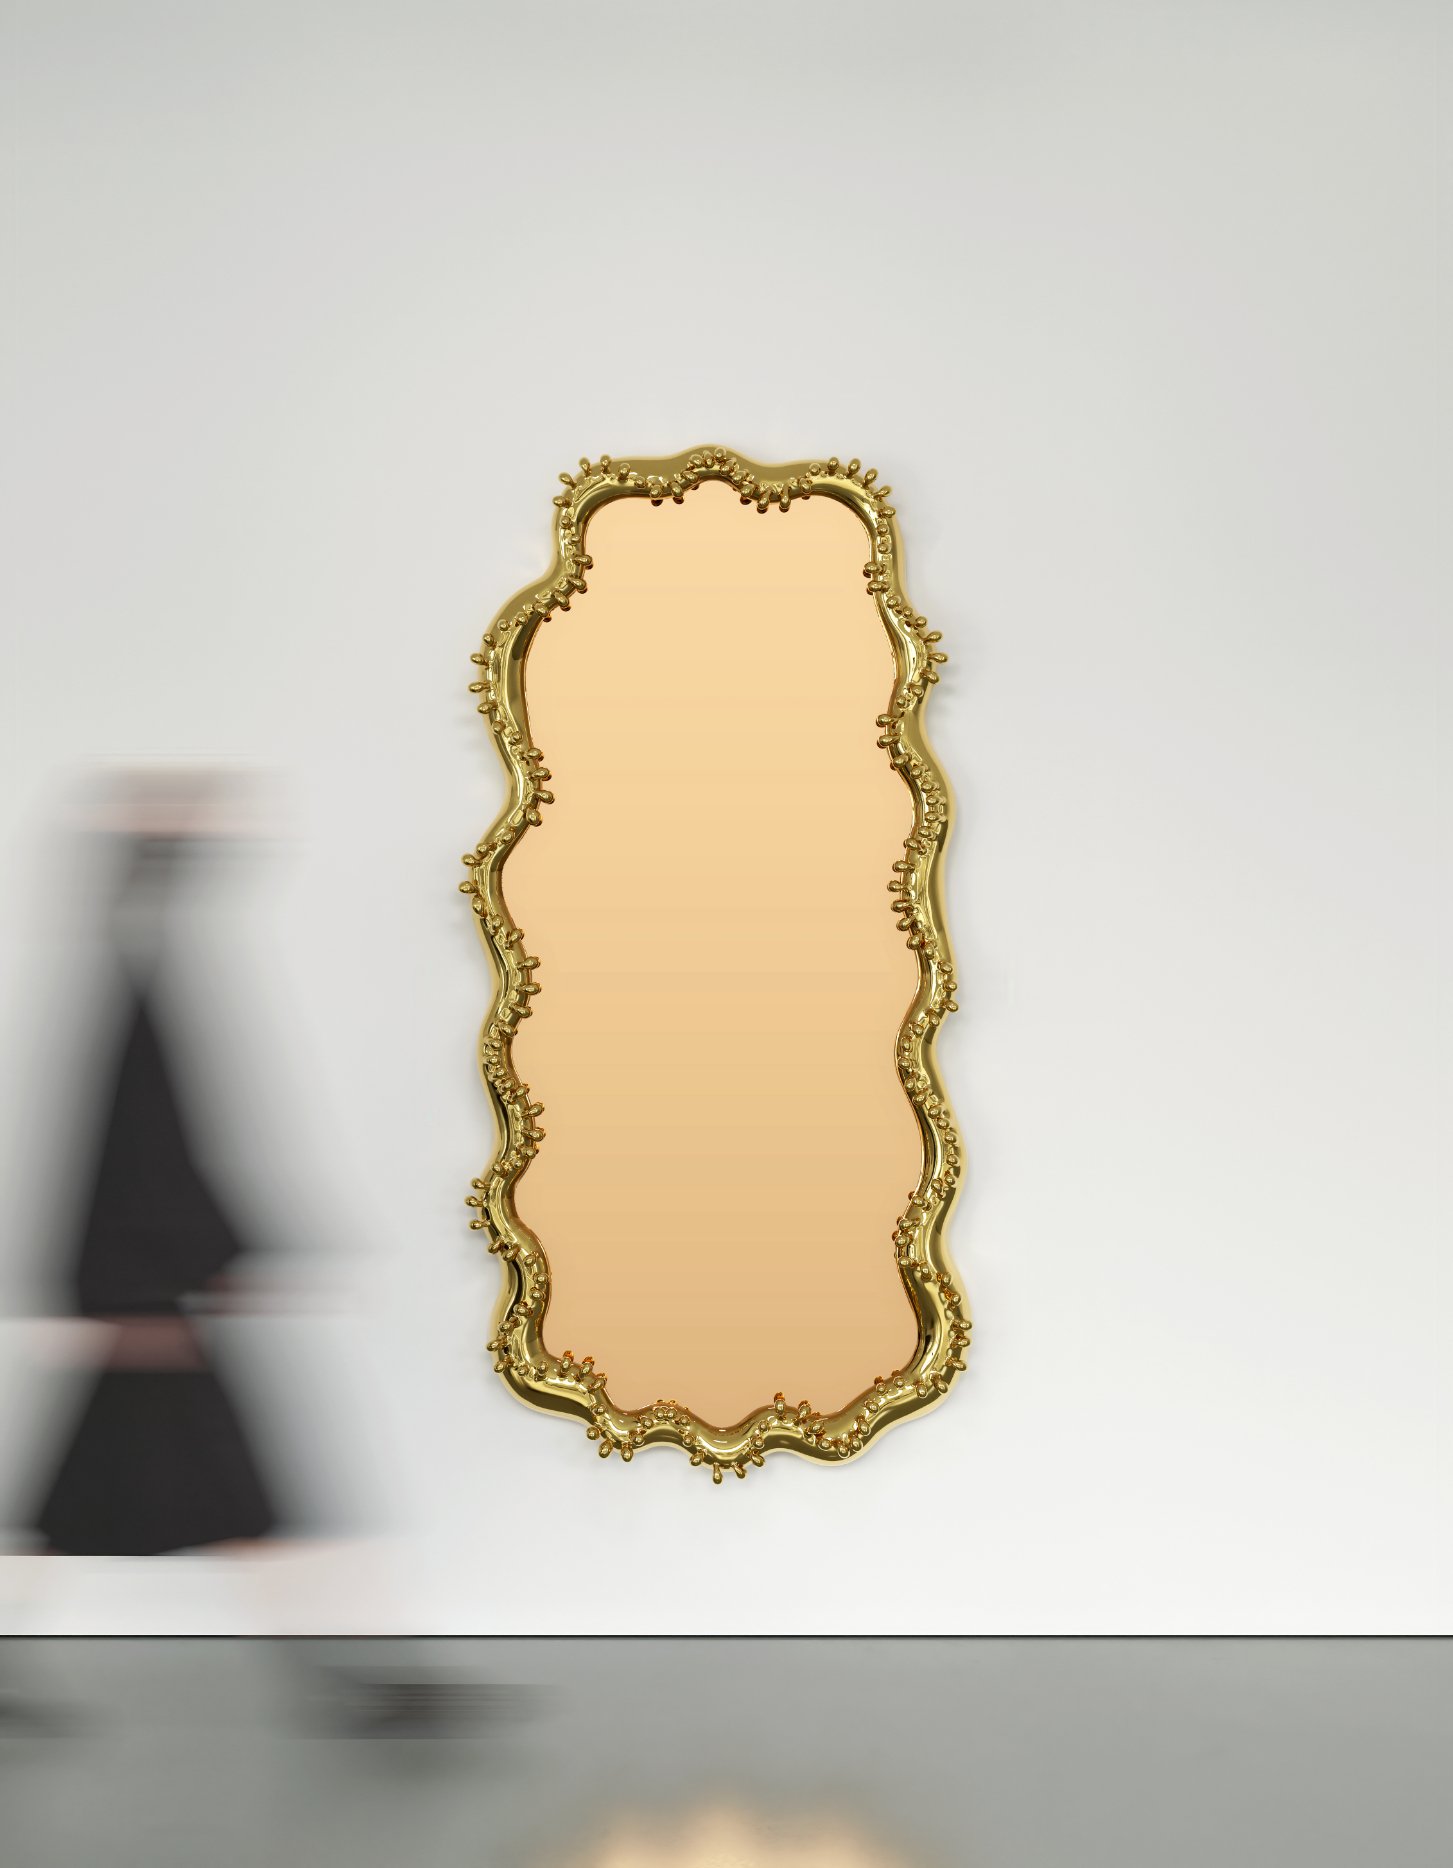  The Haas Brothers  Cause and Reflect   Cast Bronze, Peach Mirrors 201h x 99w x 13d cm | 79h x 39w x 5d in Edition 1 of 3 + 2 AP 